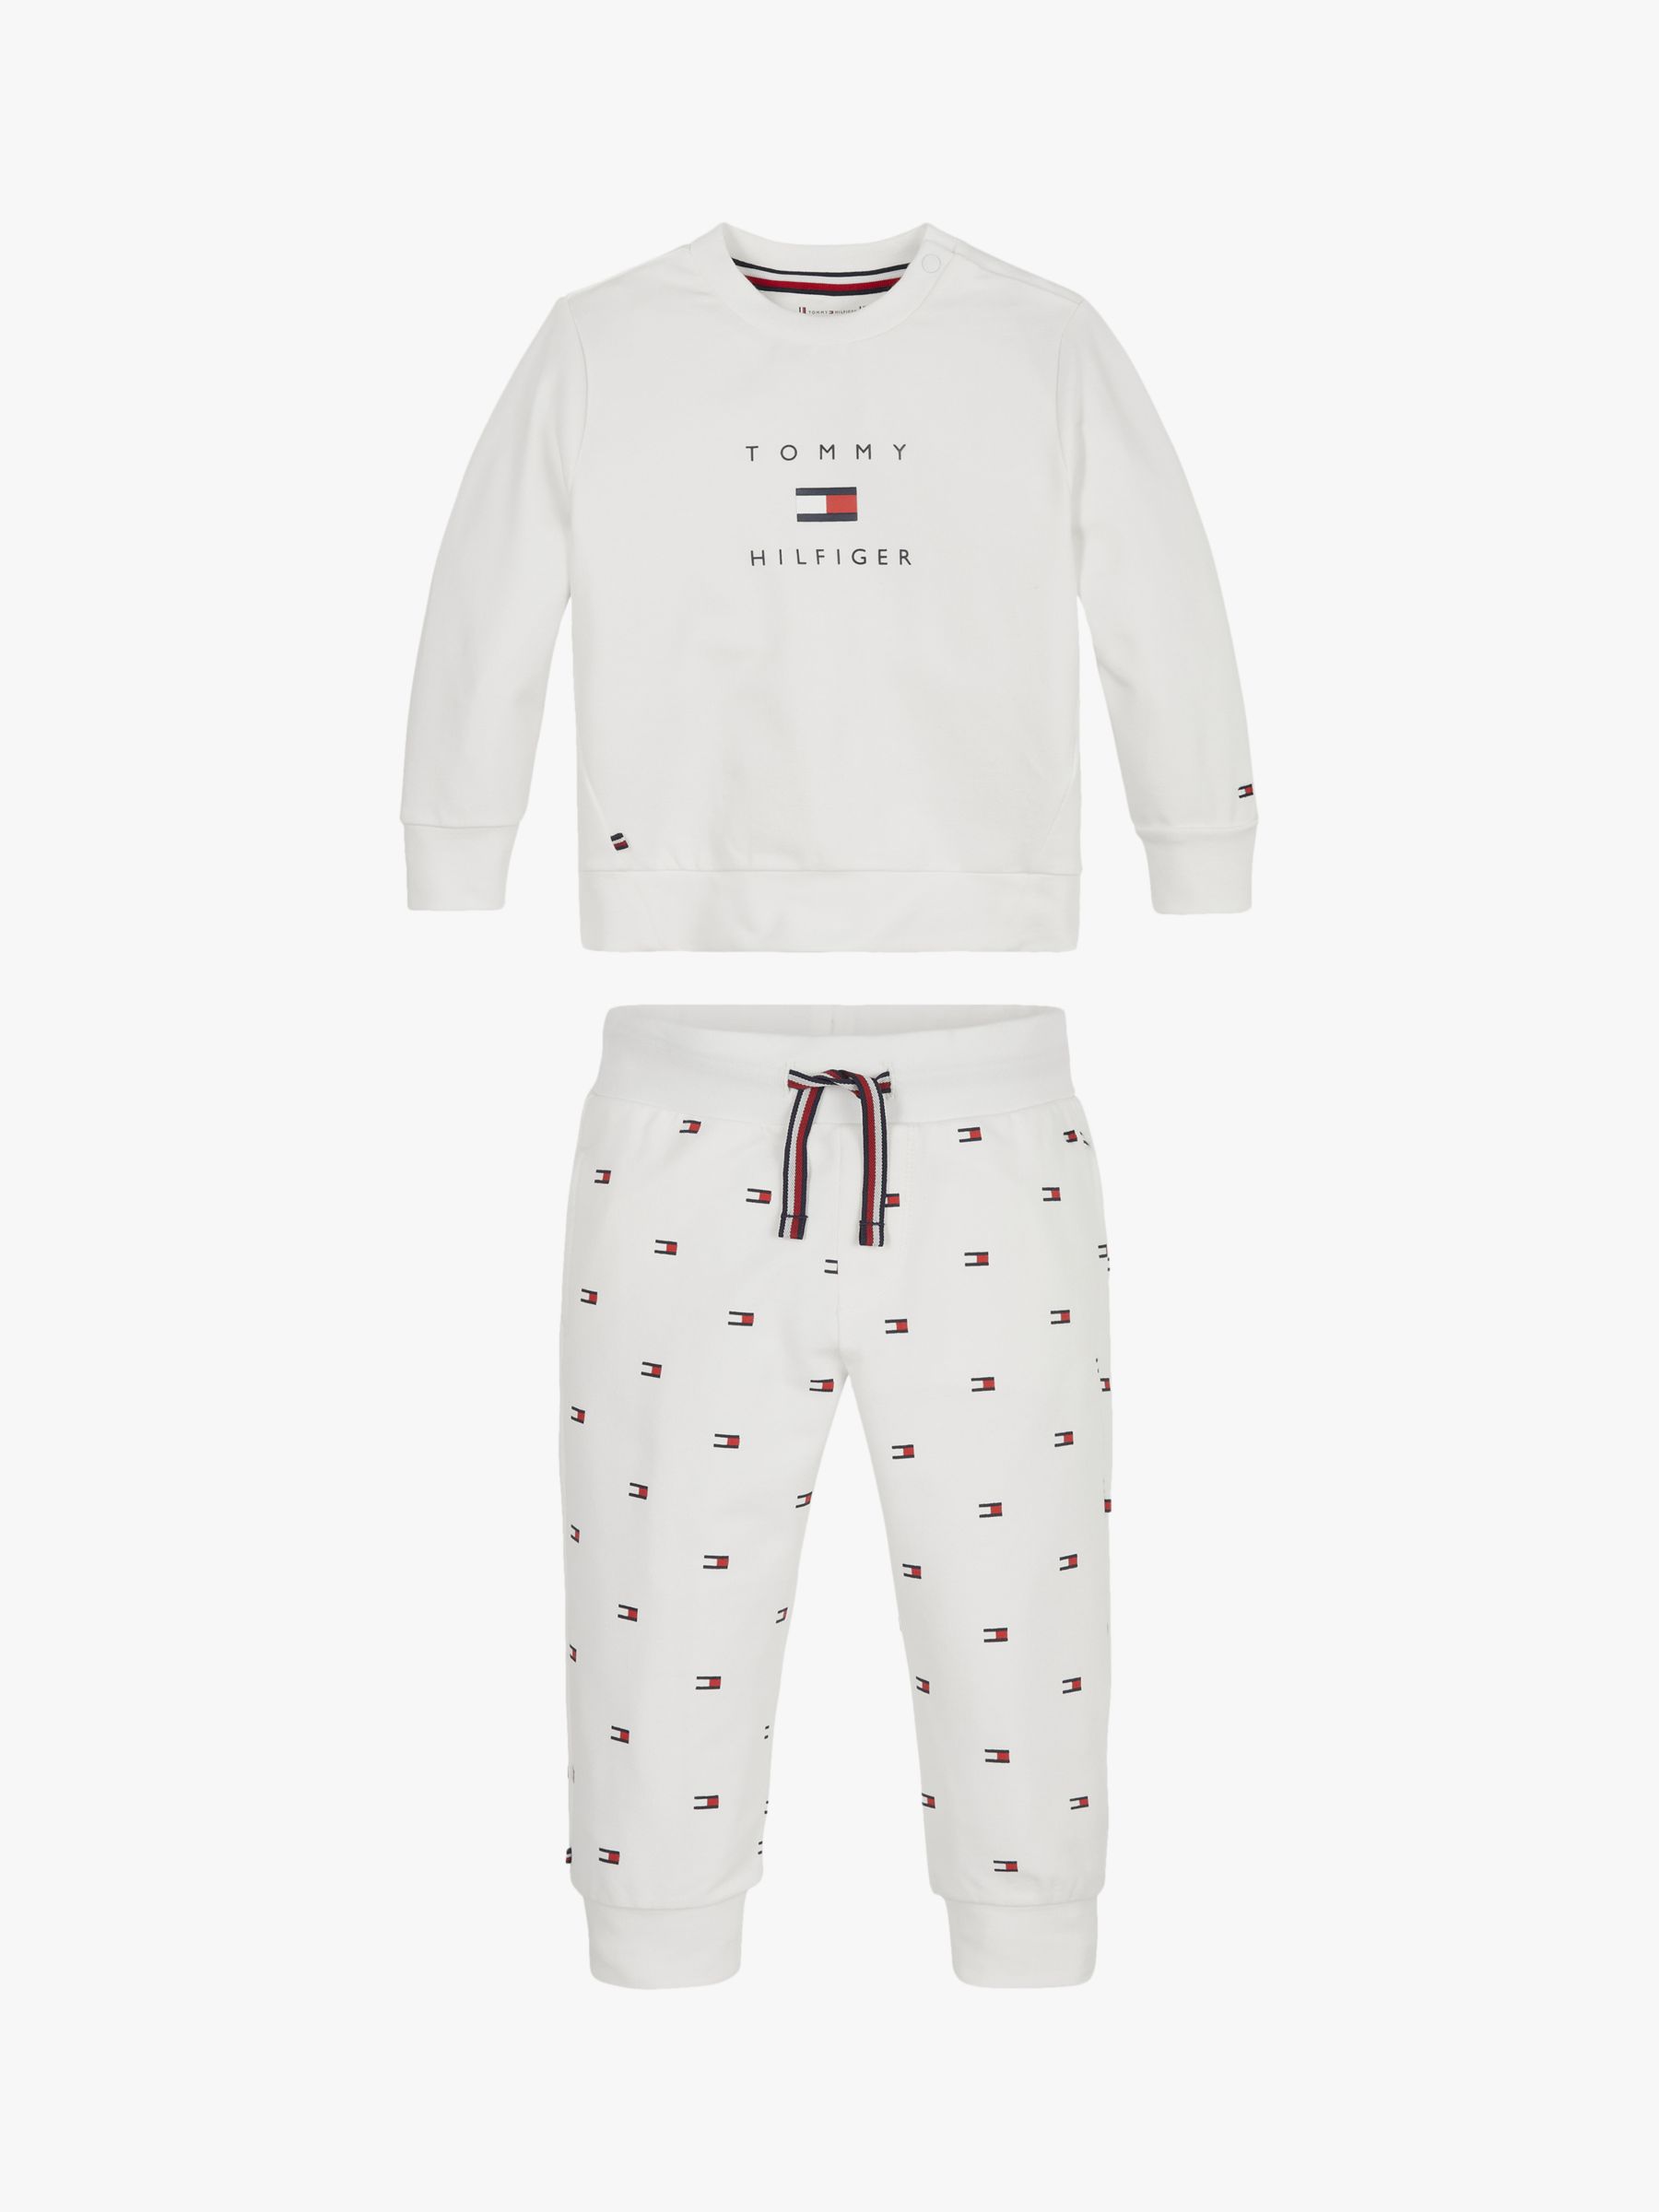 Tommy Hilfiger Baby Logo Jumper and Joggers Set, White